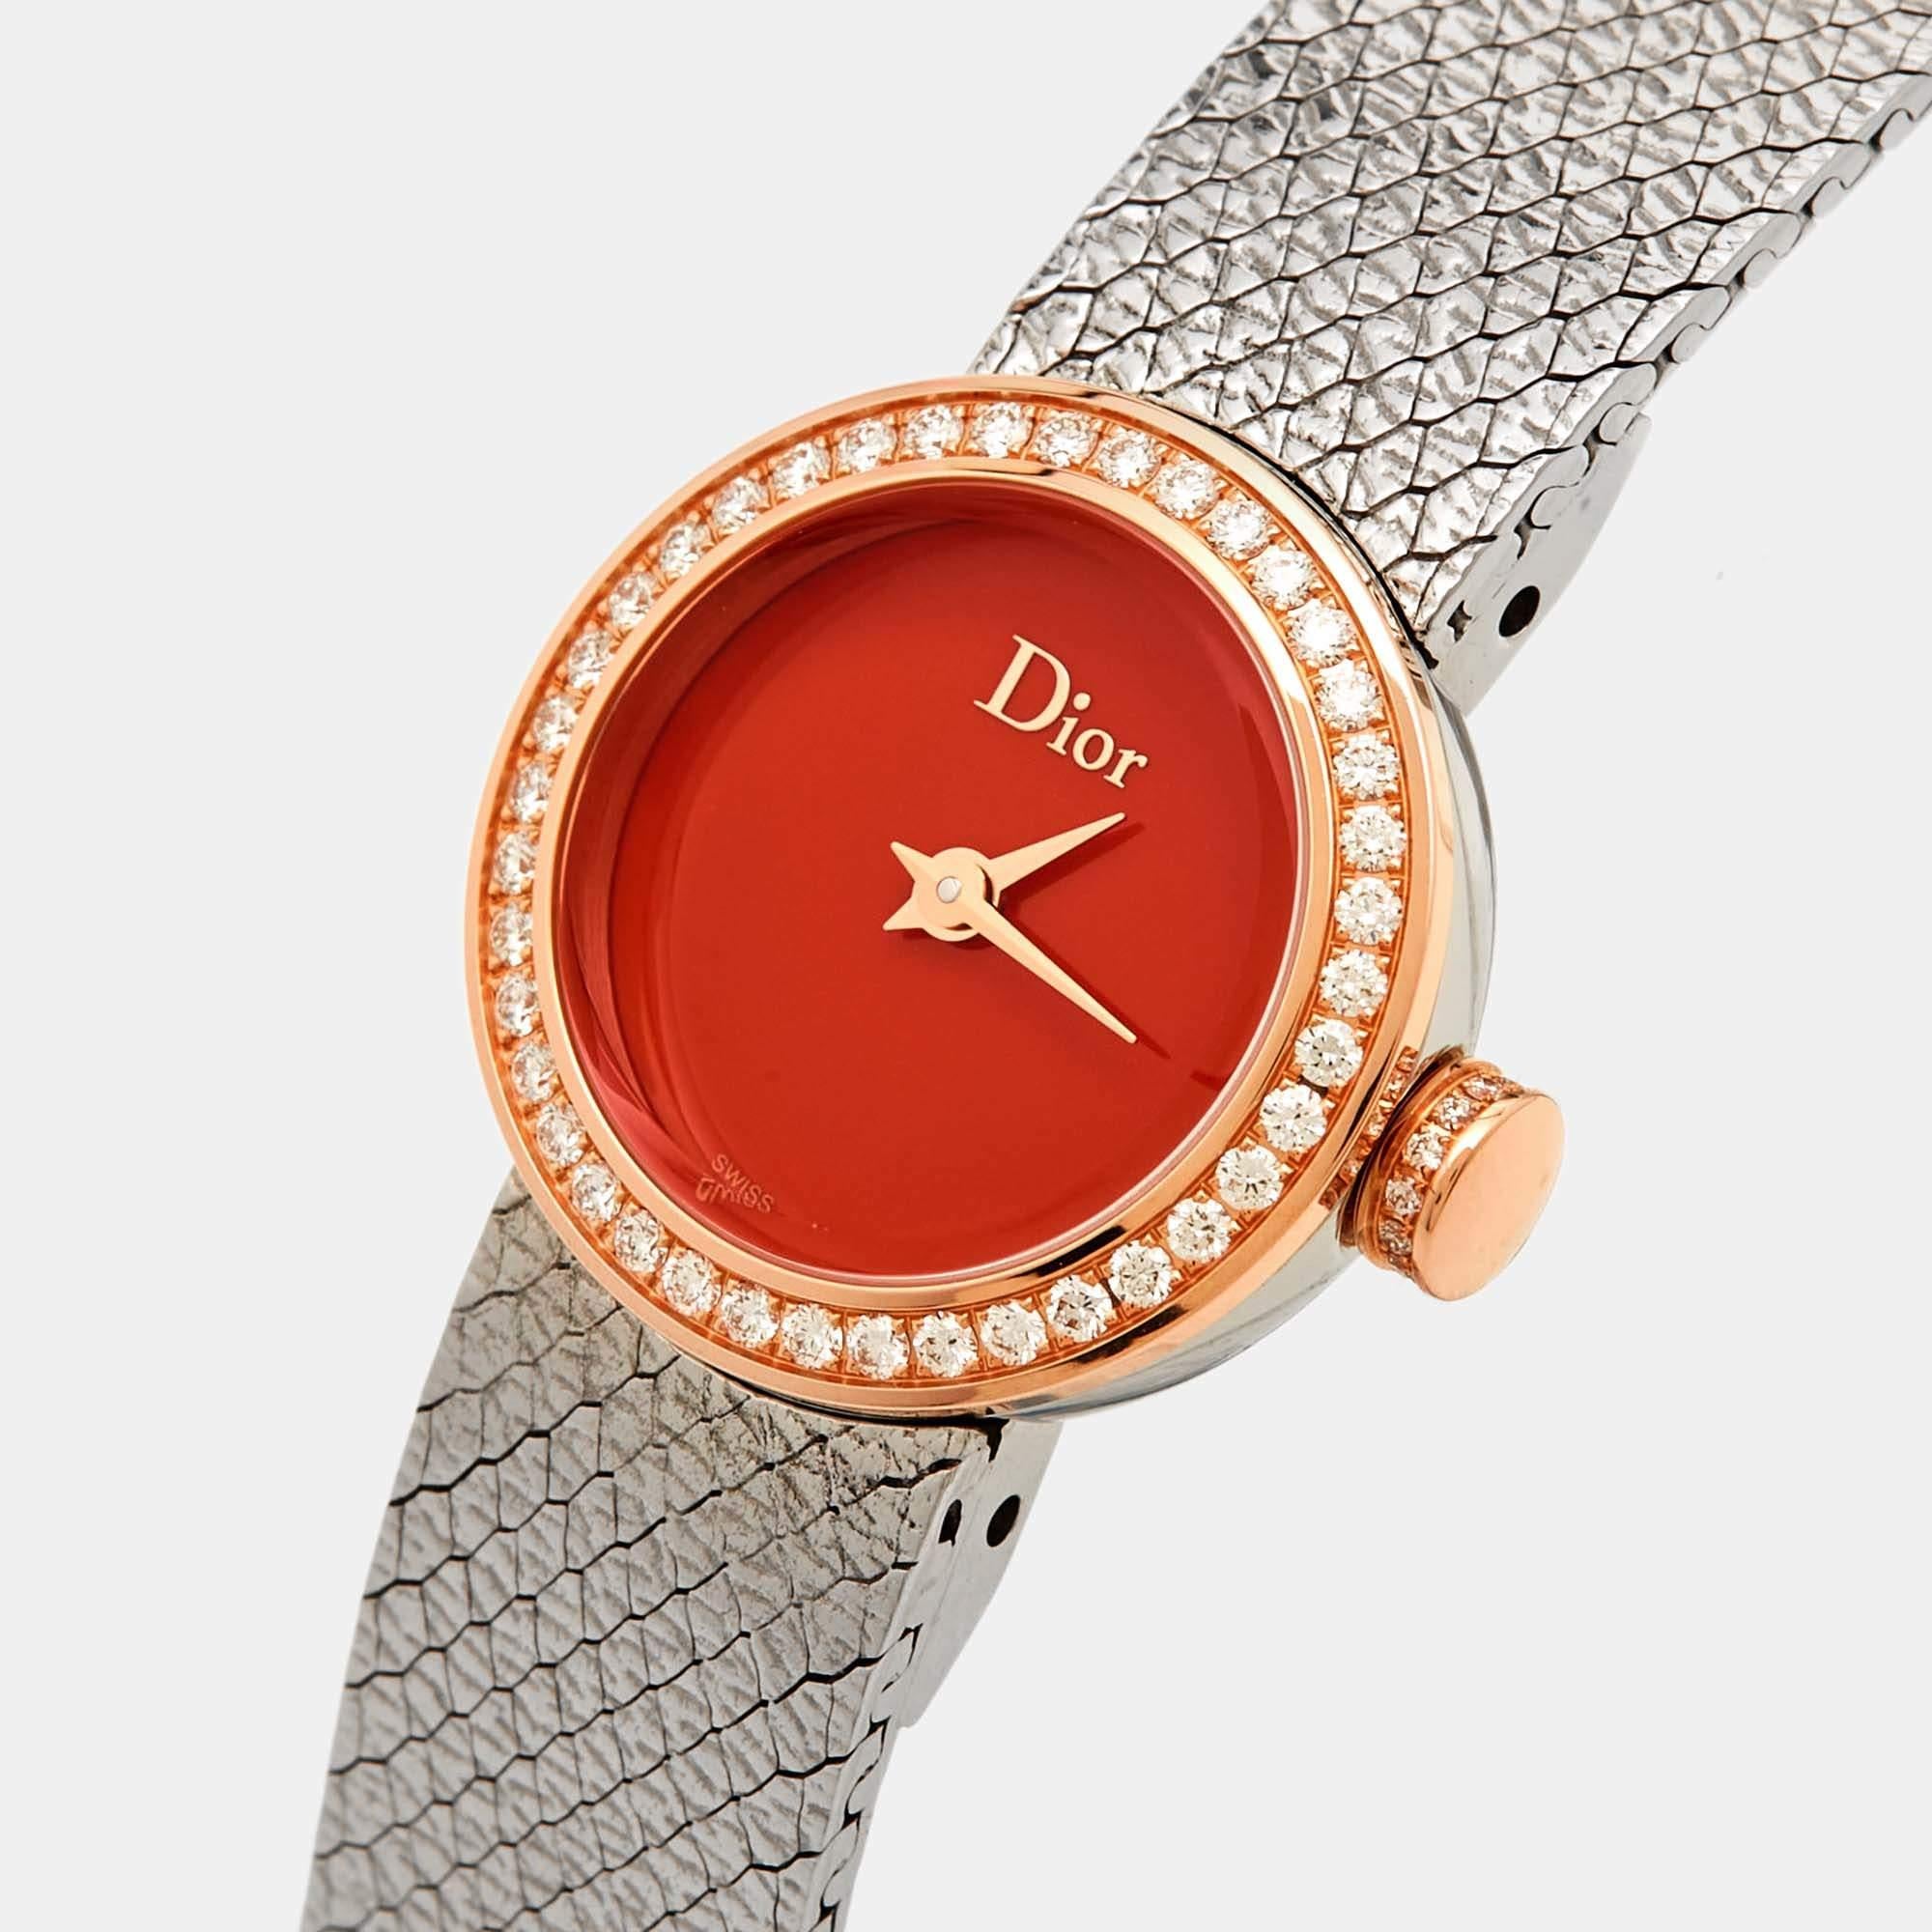 The Dior La De Dior CD04012X1001 wristwatch is a luxurious timepiece. It features an elegant blend of 18k rose gold and stainless steel, adorned with dazzling diamonds. The watch's design is a harmonious fusion of fashion and functionality, making